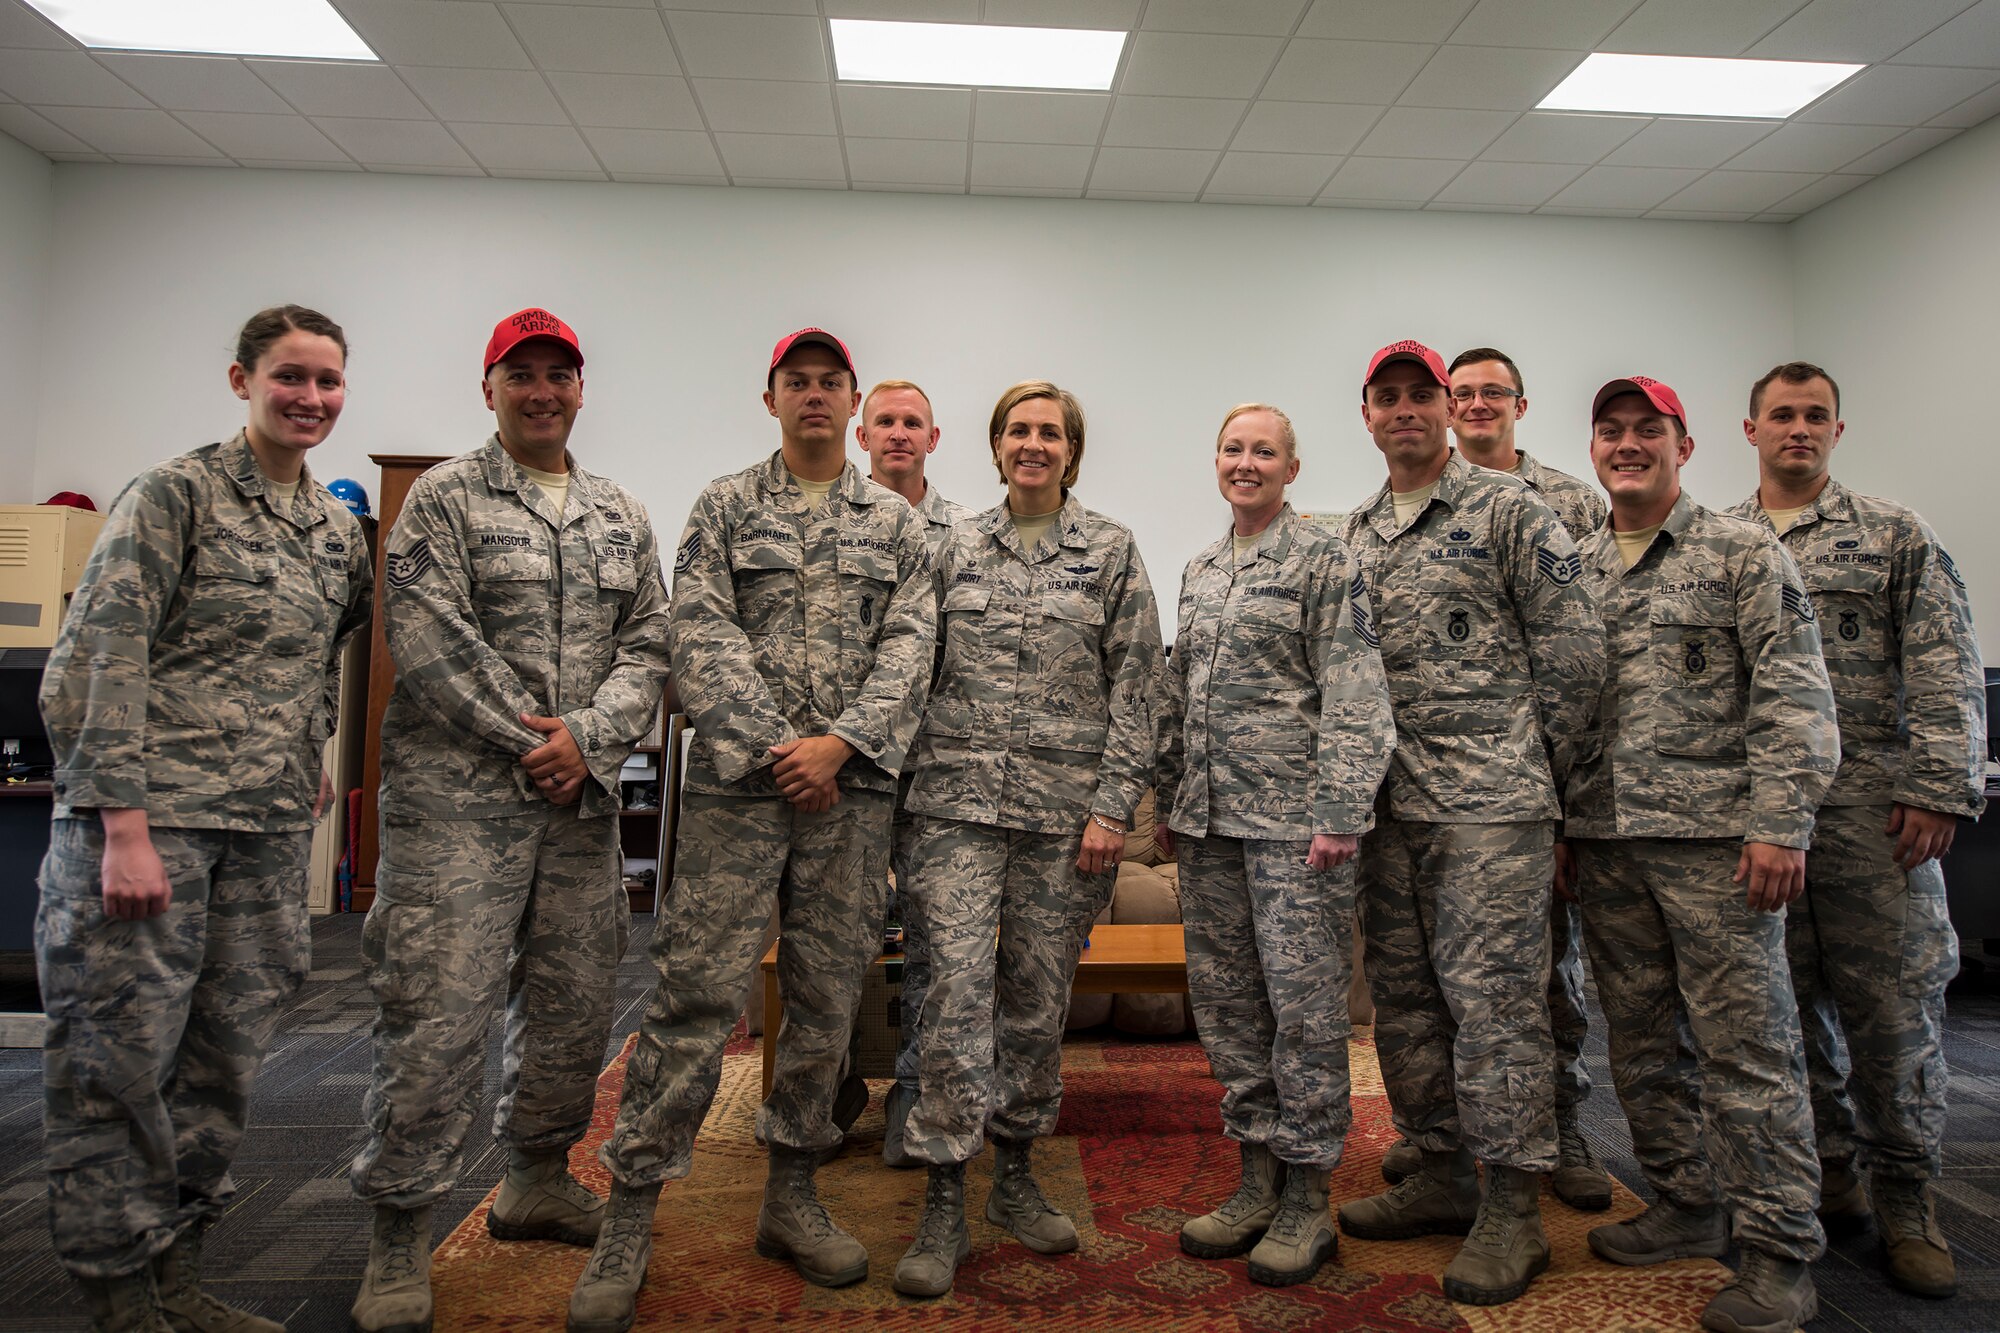 Airmen from the 23d Mission Support Group (MSG) pose for a photo with Col. Jennifer Short, 23d Wing commander, during an immersion tour, May 21, 2018, at Moody Air Force Base, Ga. Short toured the 23d Mission Support Group (MSG) to gain a better understanding of their overall mission, capabilities, and comprehensive duties. Short was able to meet and interact with Airmen from the combat arms training and maintenance as well as the chemical, biological, radiological and nuclear defense sections of the MSG. (U.S. Air Force photo by Airman 1st Class Eugene Oliver)